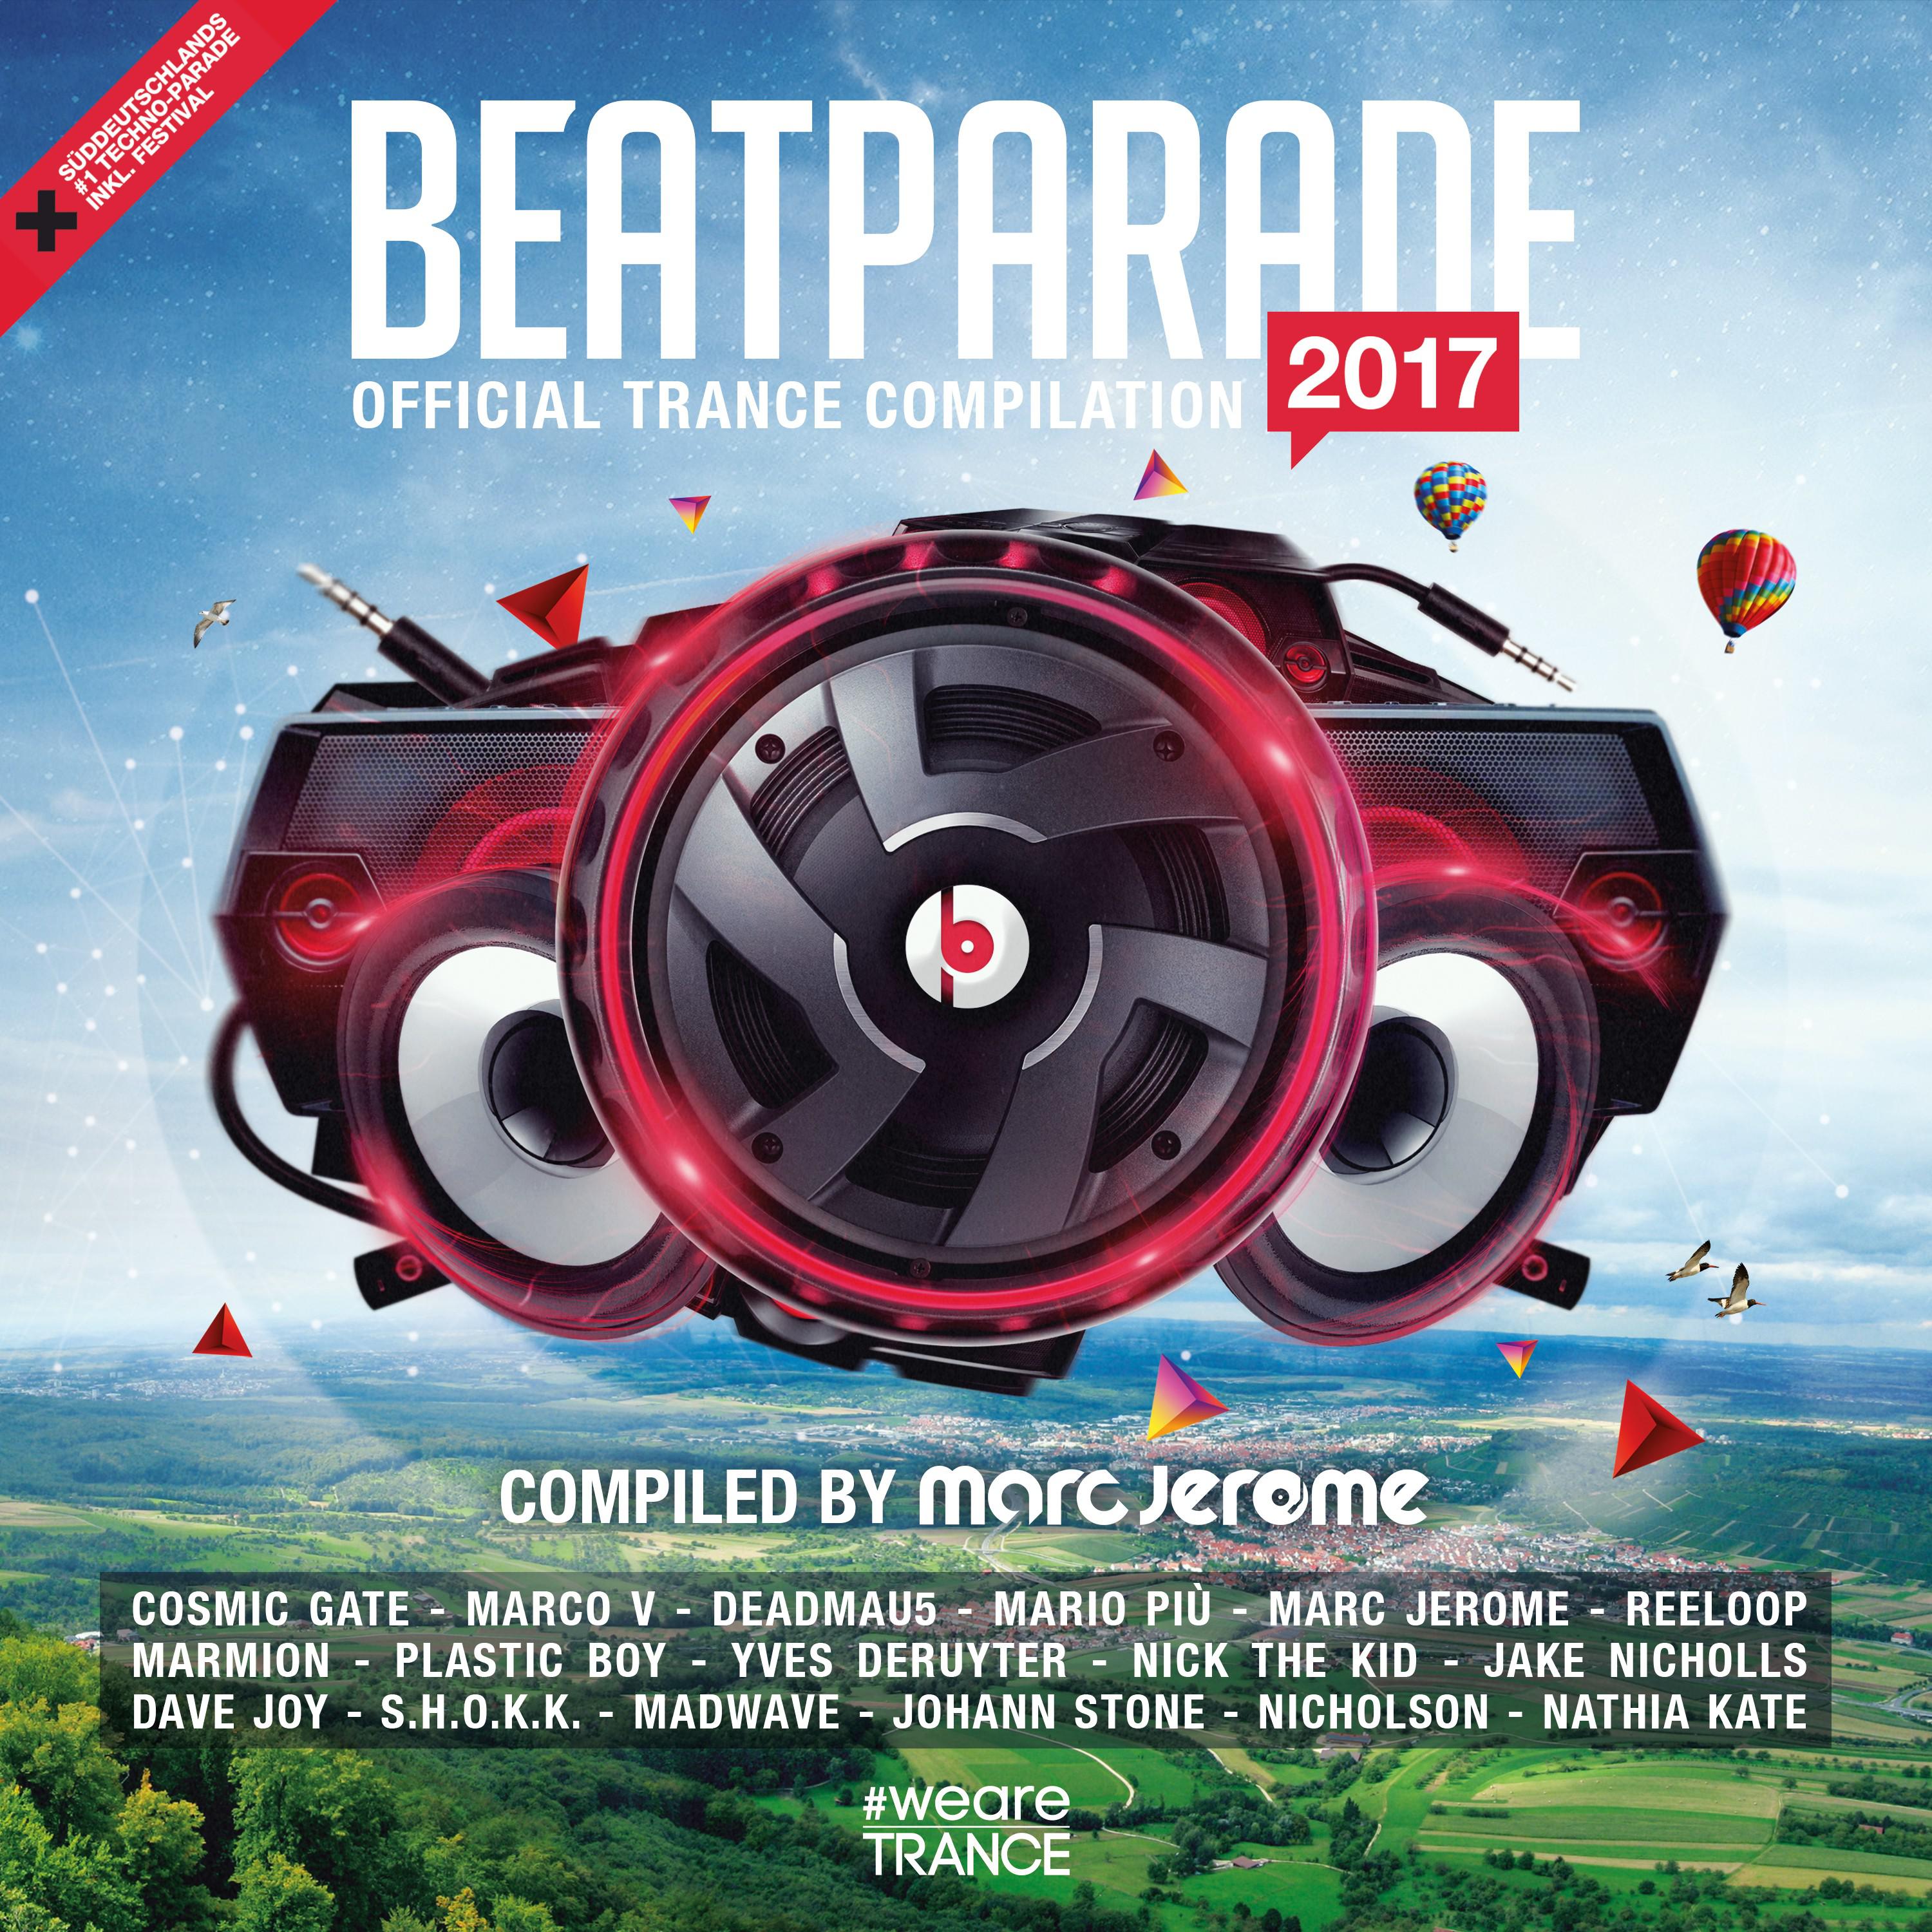 Beatparade 2017 (Official Trance Compilation) [Compiled by Marc Jerome]